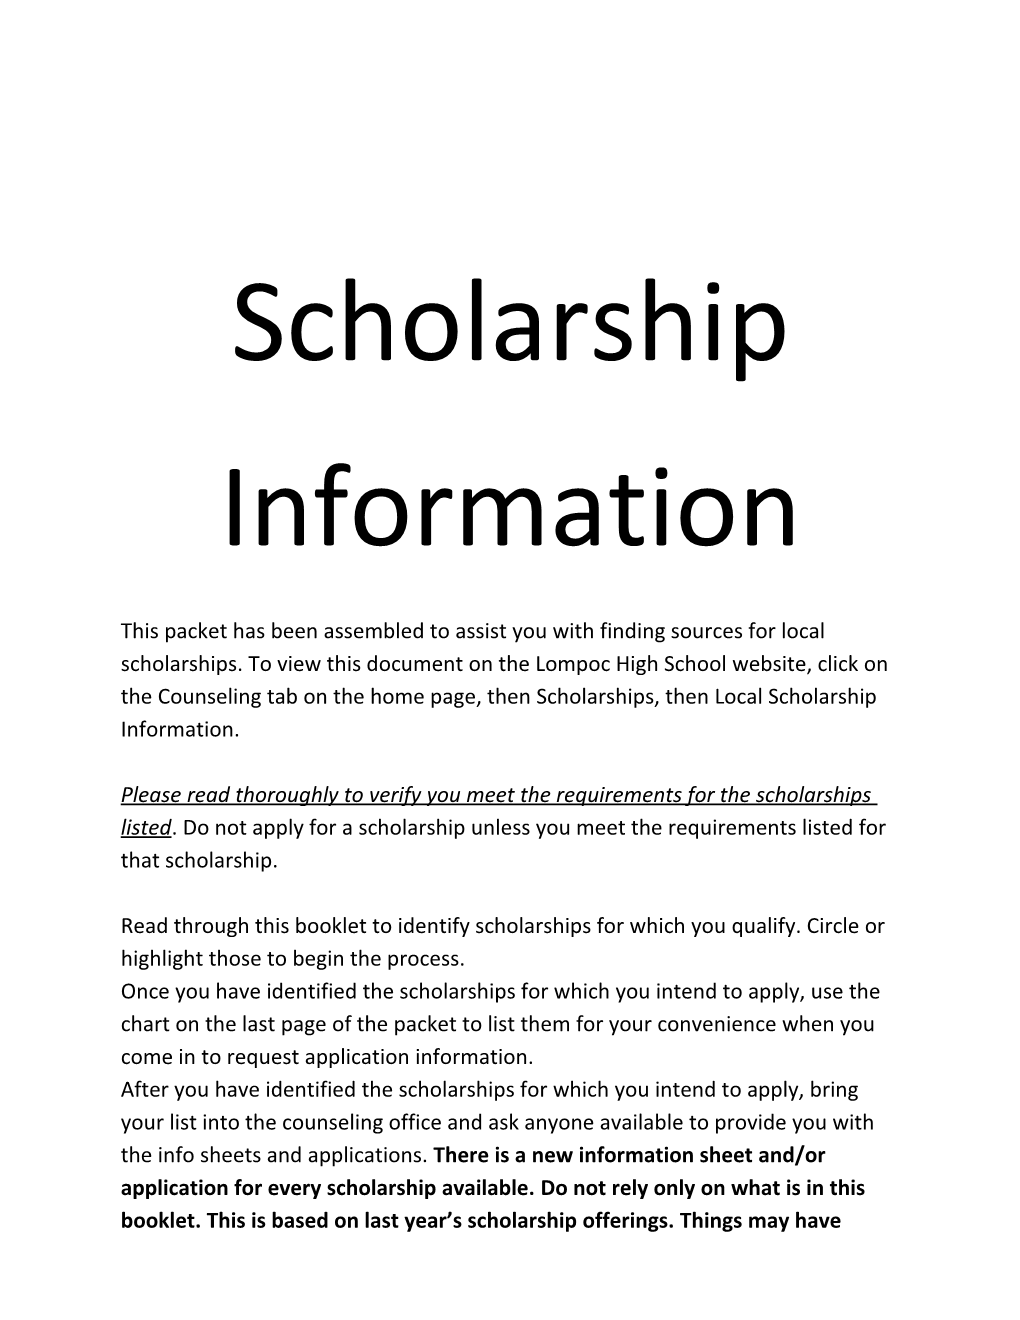 This Packet Has Been Assembled to Assist You with Finding Sources for Local Scholarships